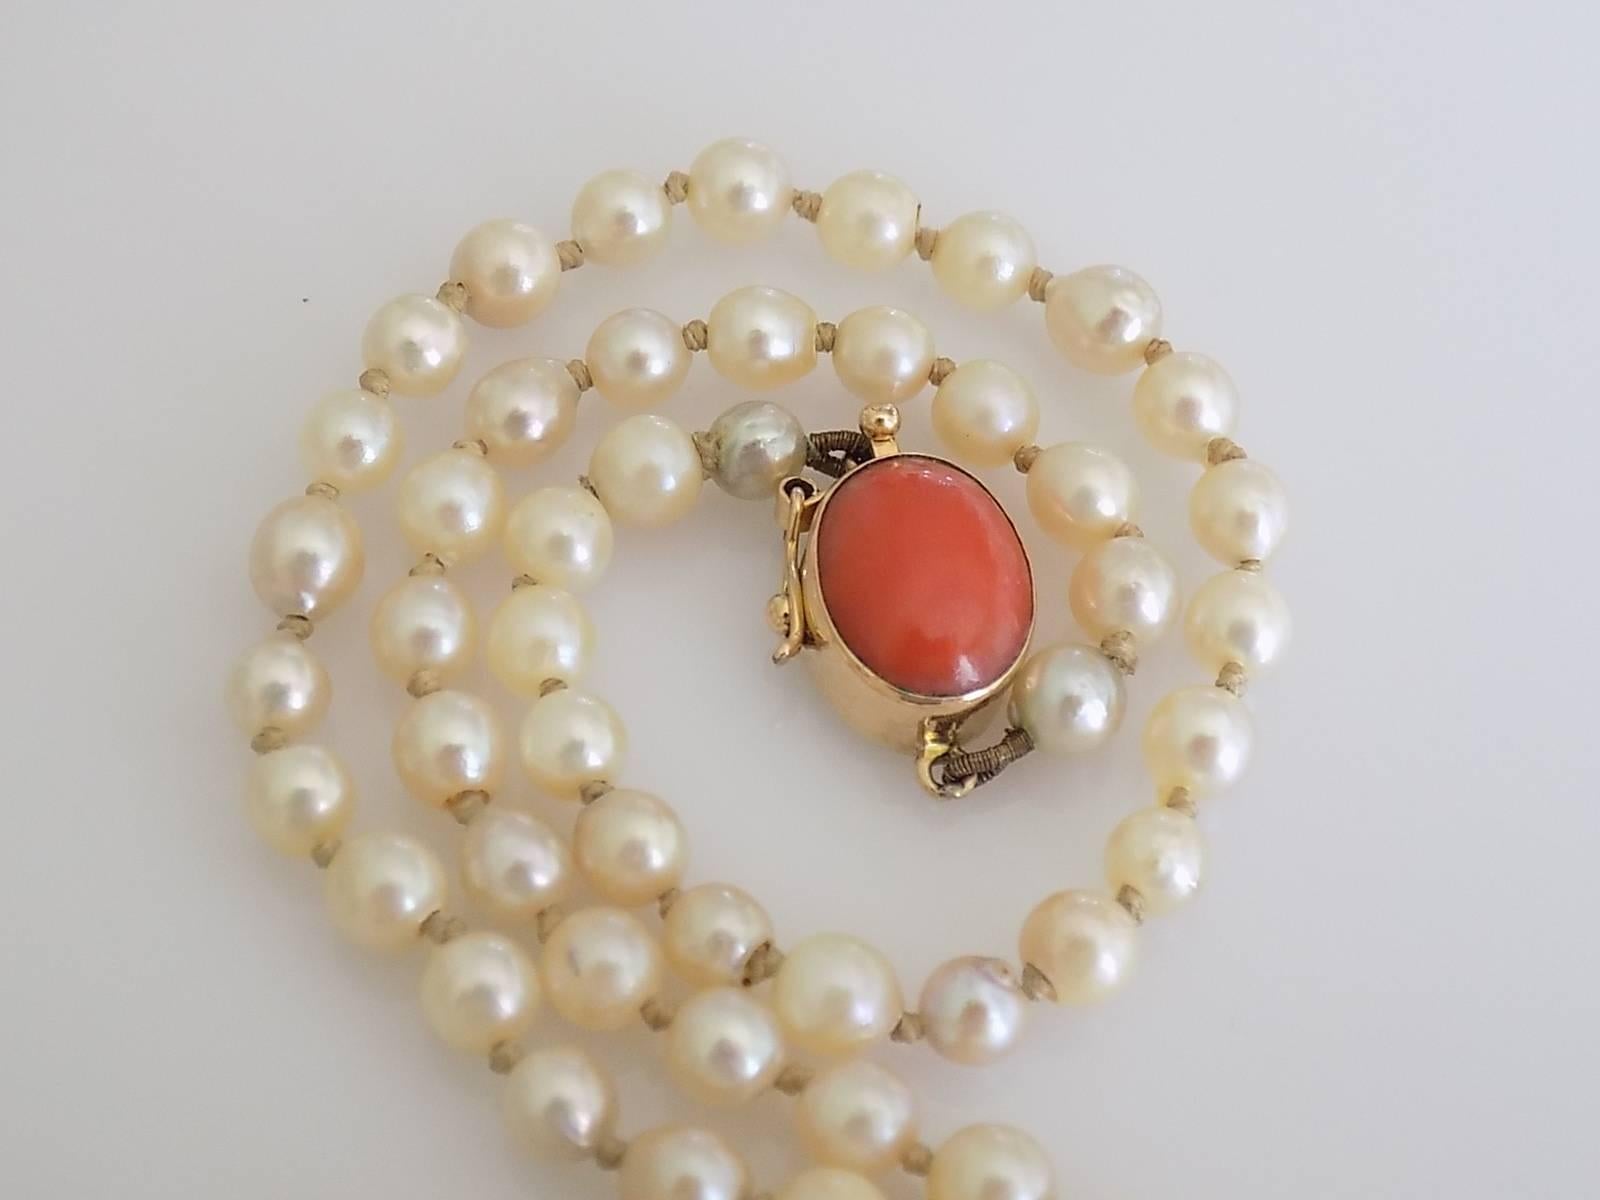 A Lovely Art Deco c.1920s hand knotted Opera length Cultured pearl necklace on 18 Carat Gold and Coral push in clasp.
Length including clasp 30 inch;.
Pearls approx. 4mm.
Weight 16.5gr.
Marked 750 for 18 Carat Gold.
